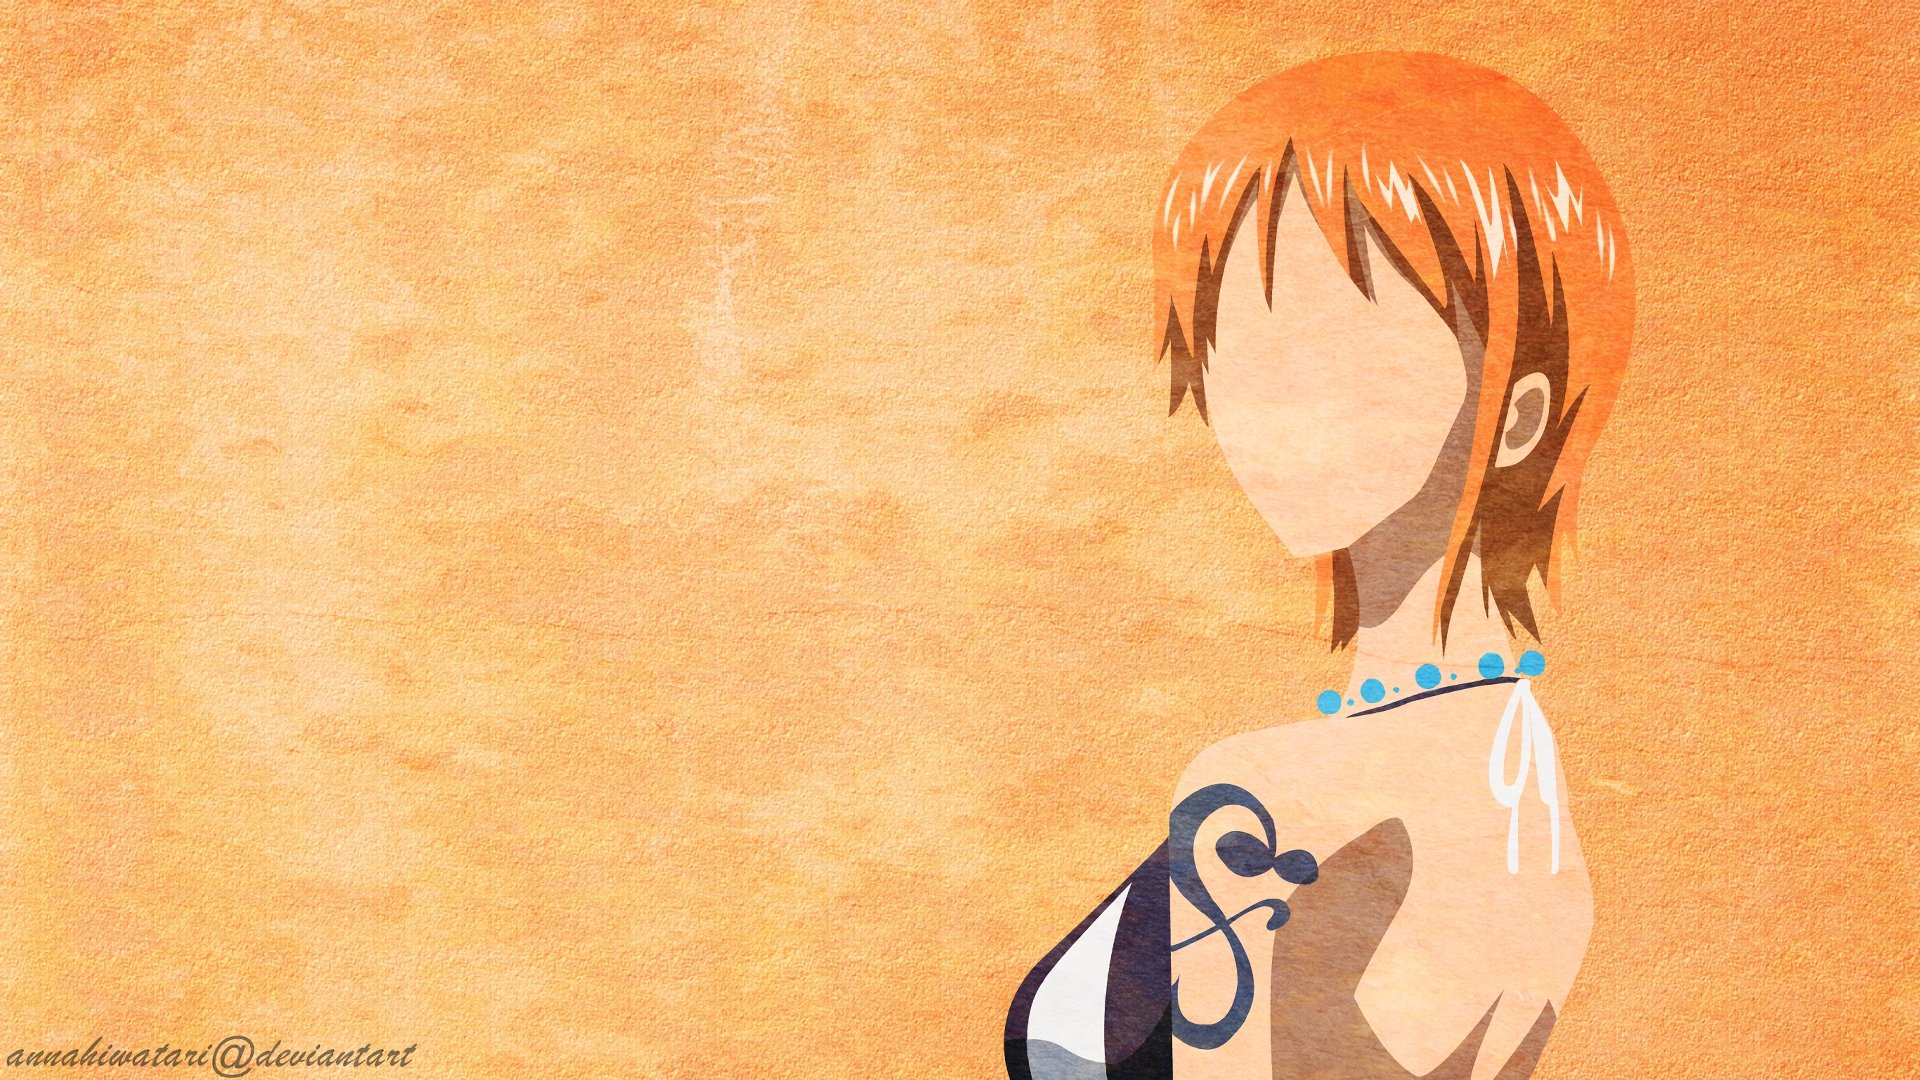  Nami  One  Piece  wallpapers  HD  for desktop backgrounds 